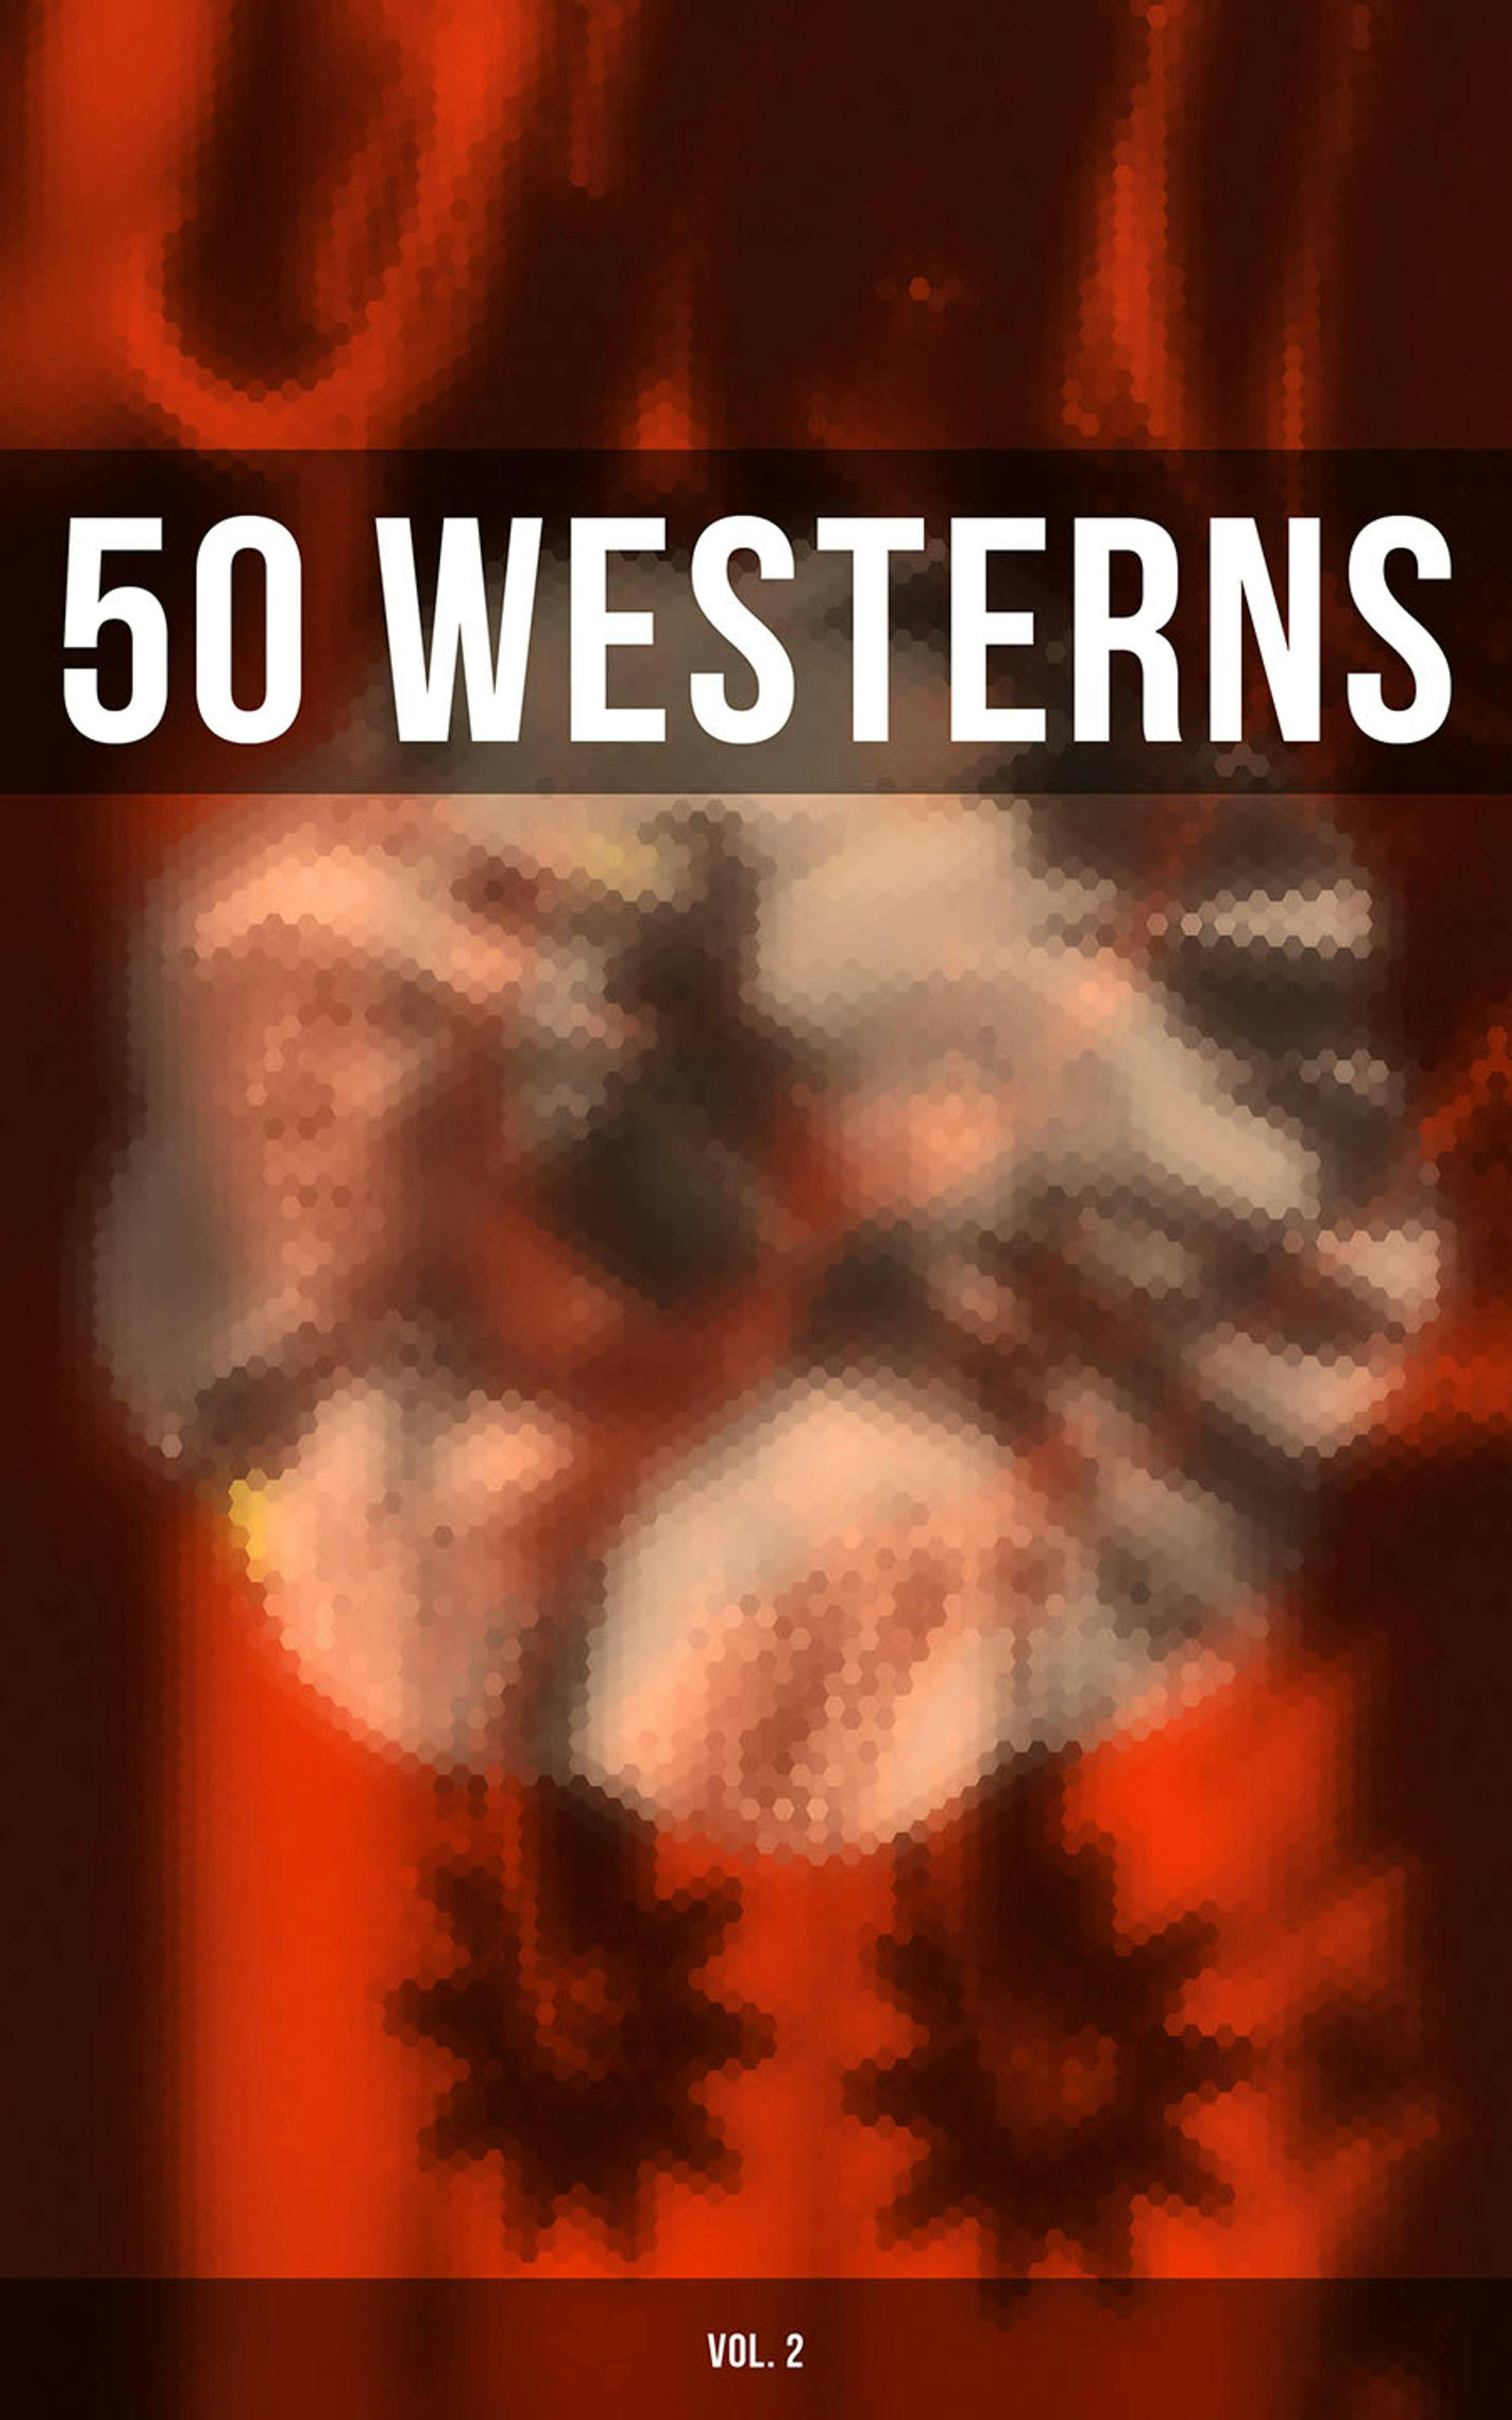 50 WESTERNS (Vol. 2): Ride Proud Rebel, Winnetou, The Two-Gun Man, The Last of the Mohicans, The Outcasts of Poker Flat, Heart of the West... - undefined